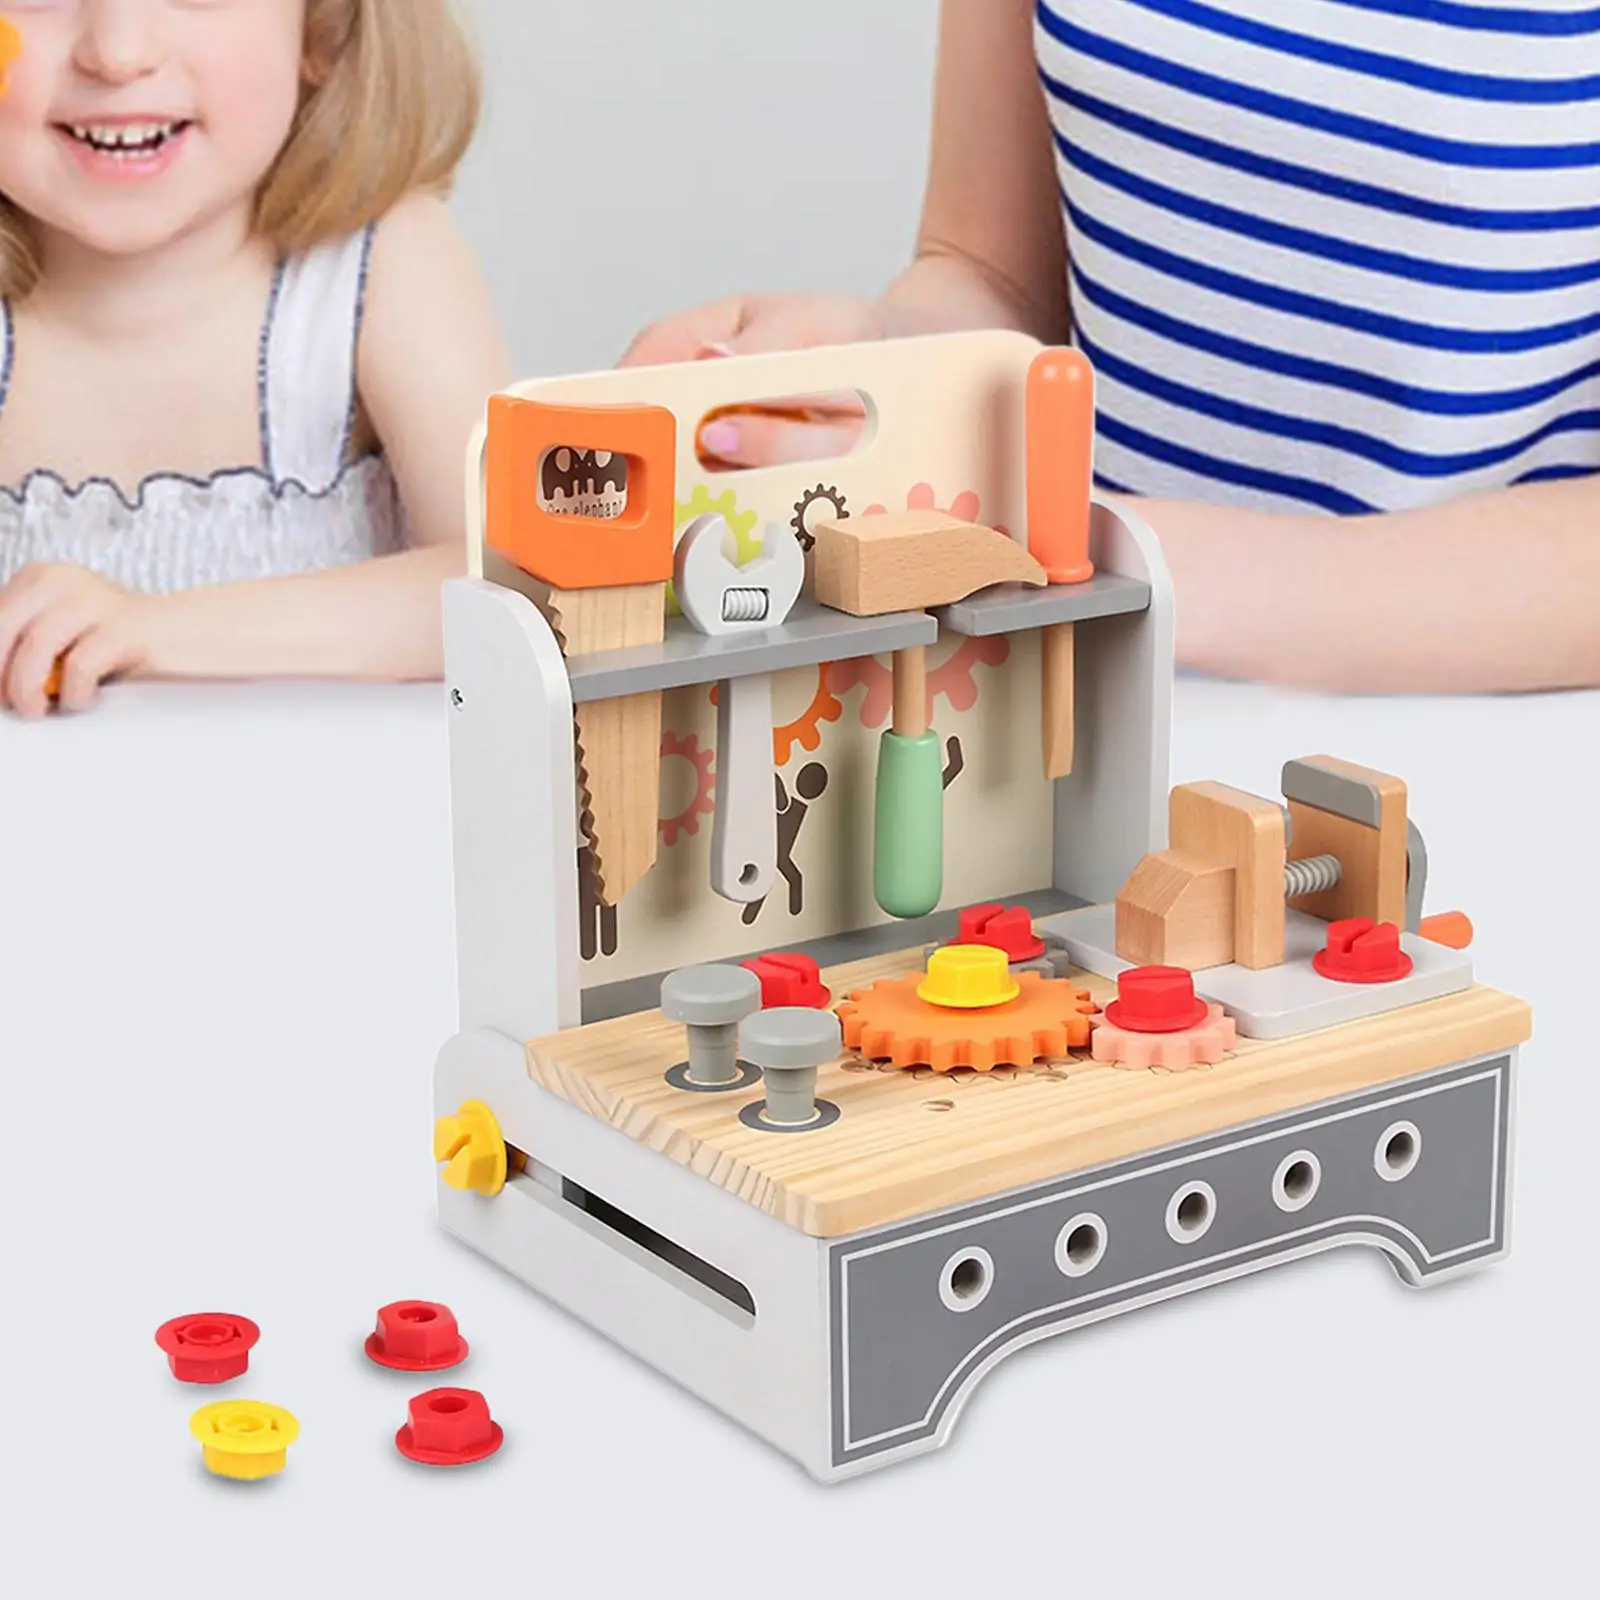 Toy Tool Kit Pretend Play Toy Simulation Repair Tool Bench for Outdoor